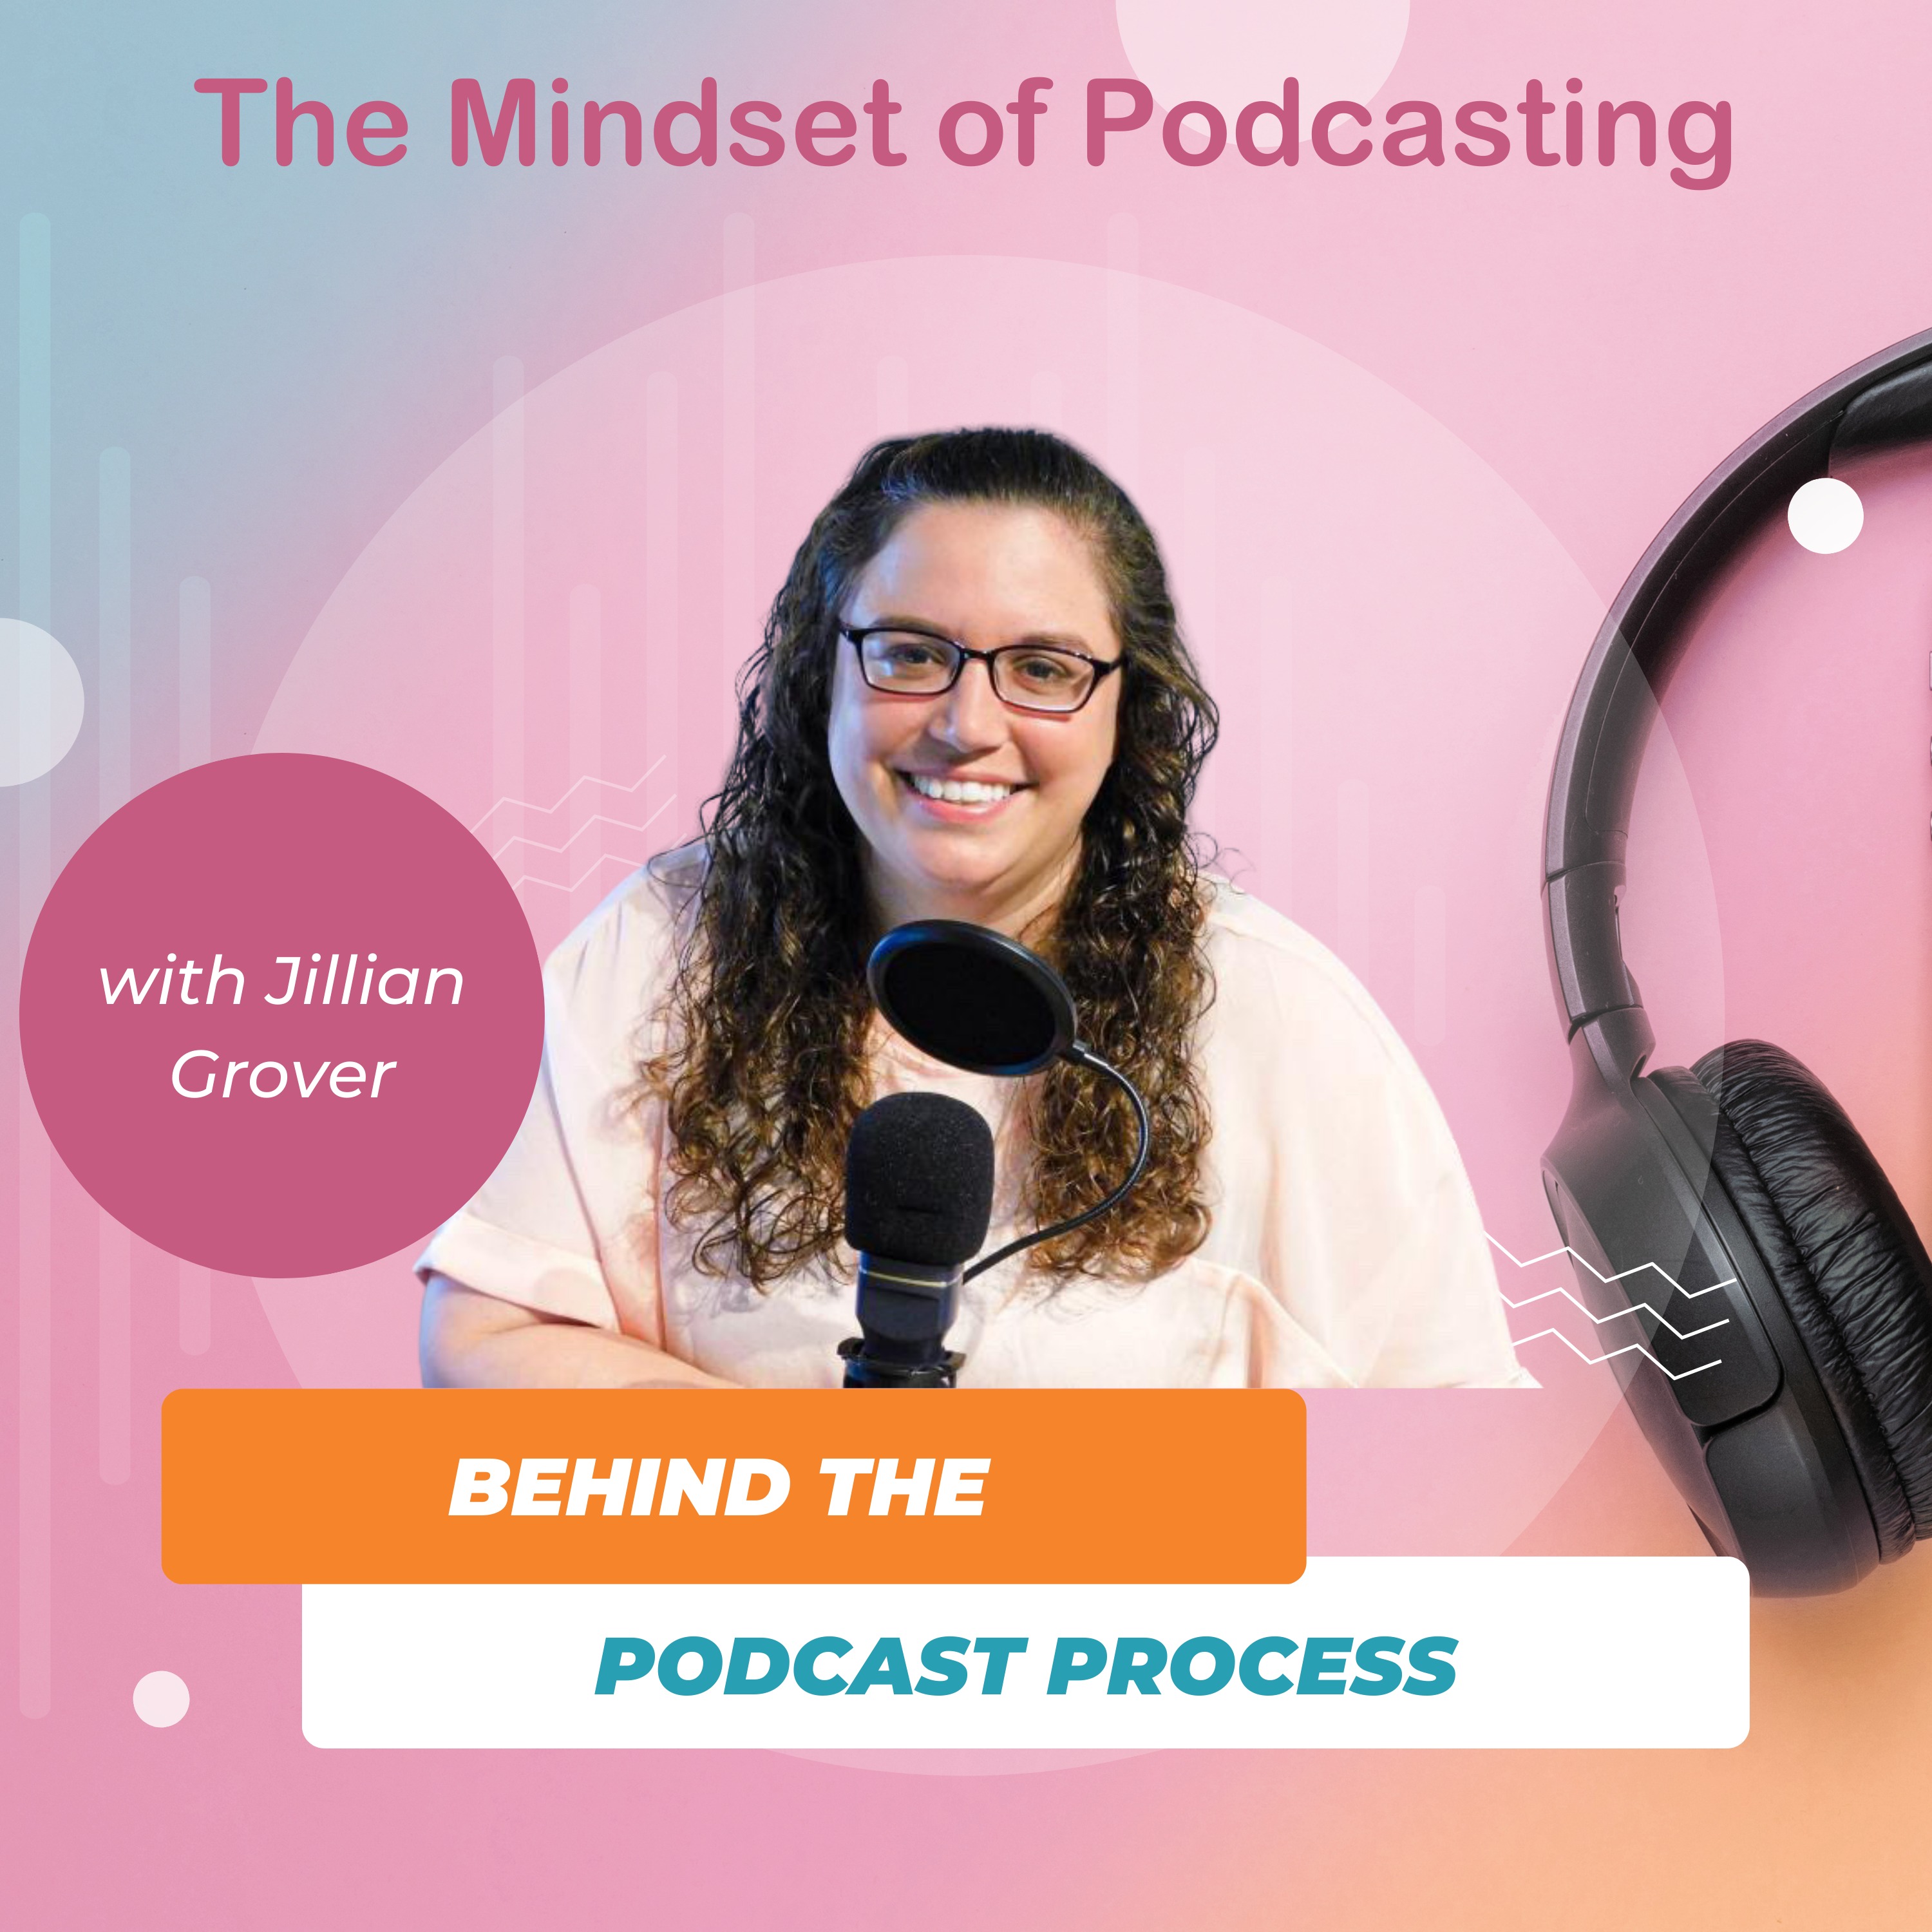 Behind the Podcast Process Image